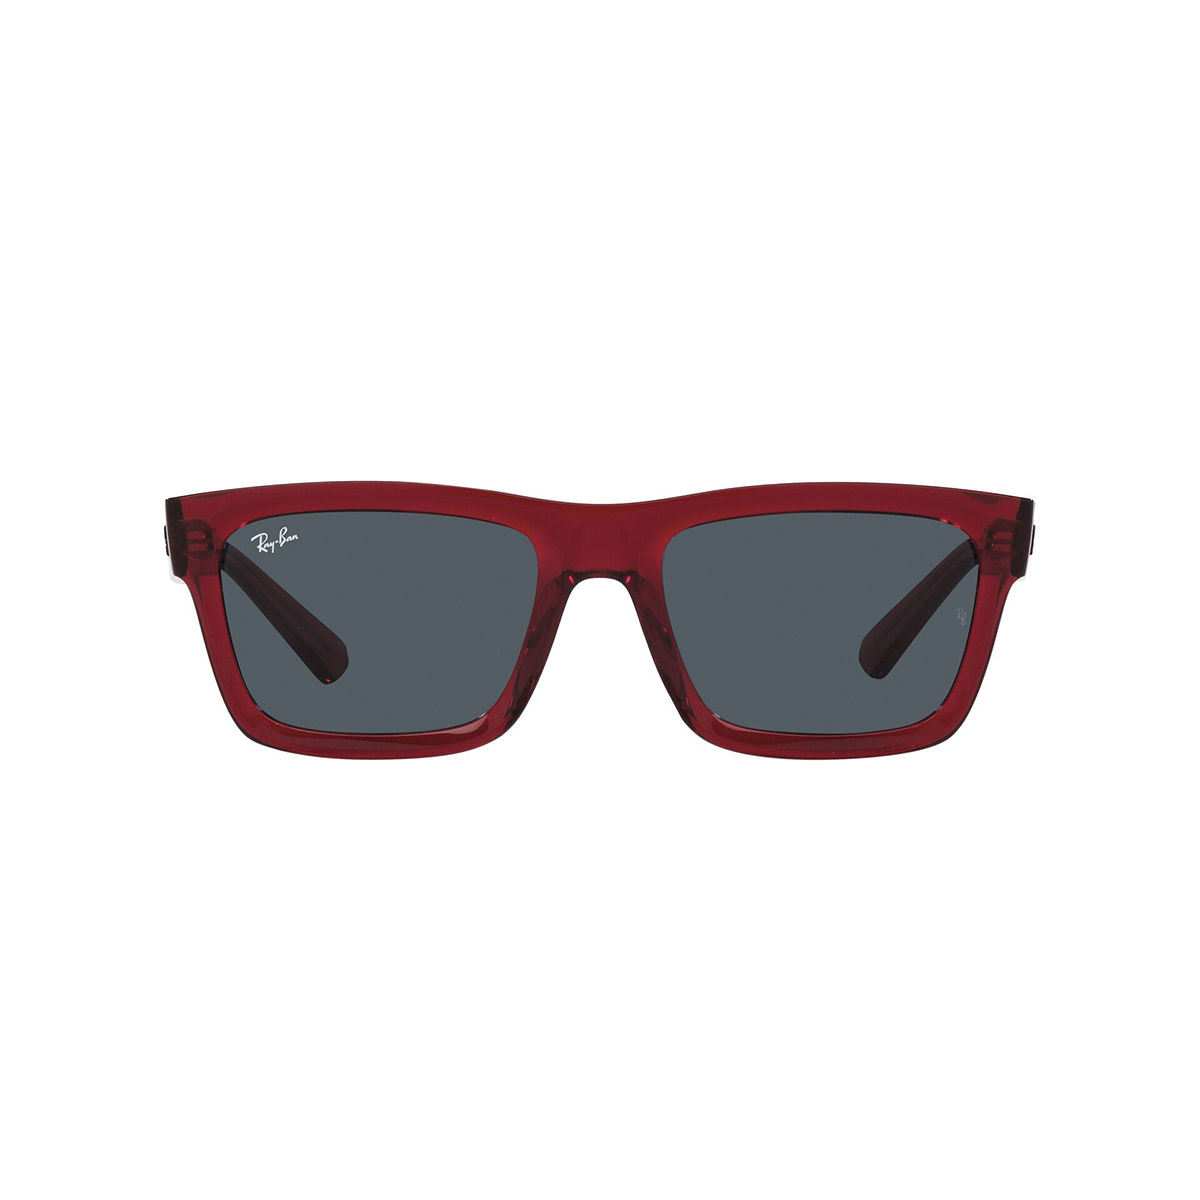 Discover more than 228 buy red sunglasses super hot